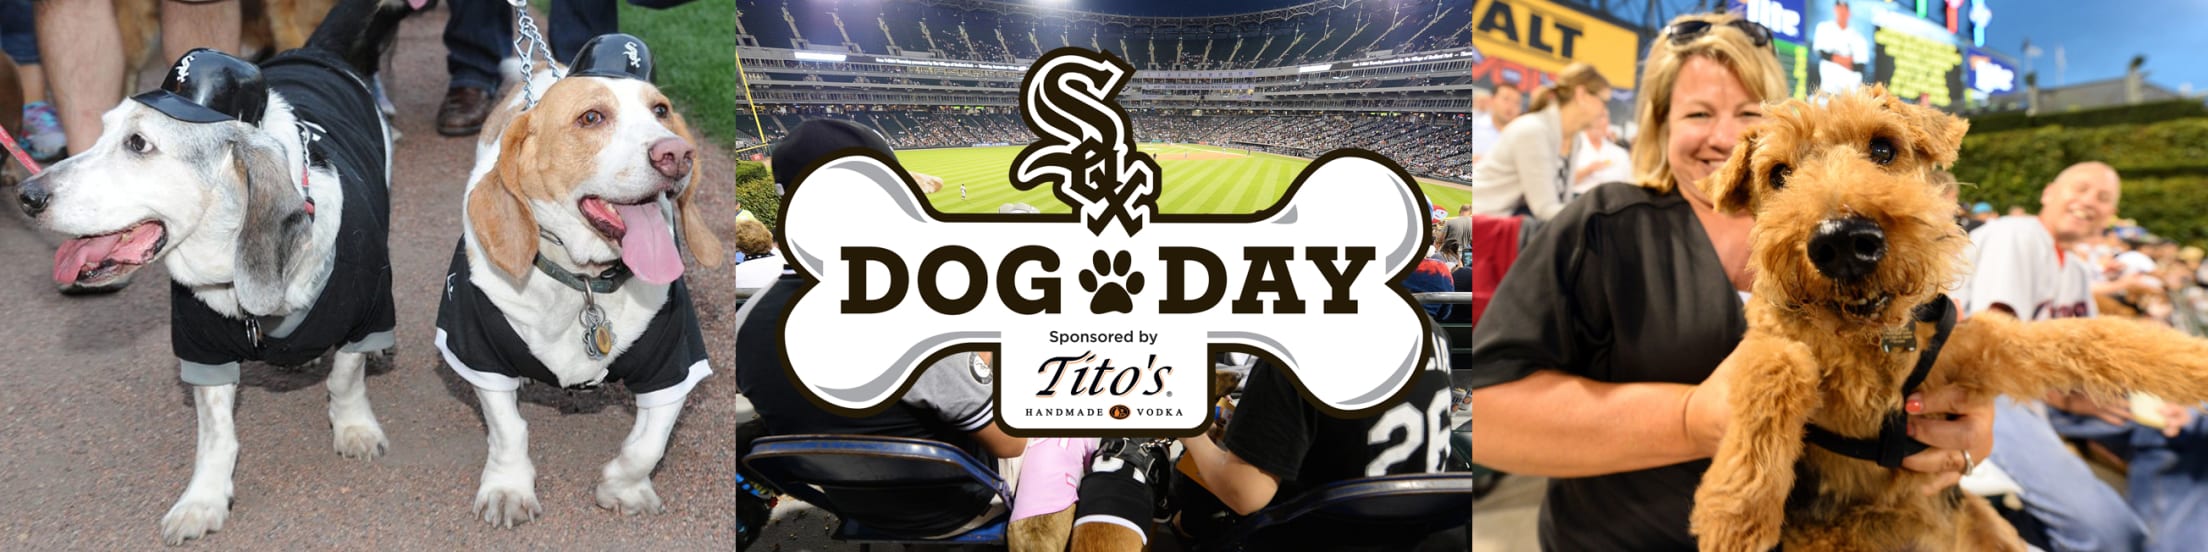 A 'horse' showed up to White Sox's dog promotion - Chicago Sun-Times